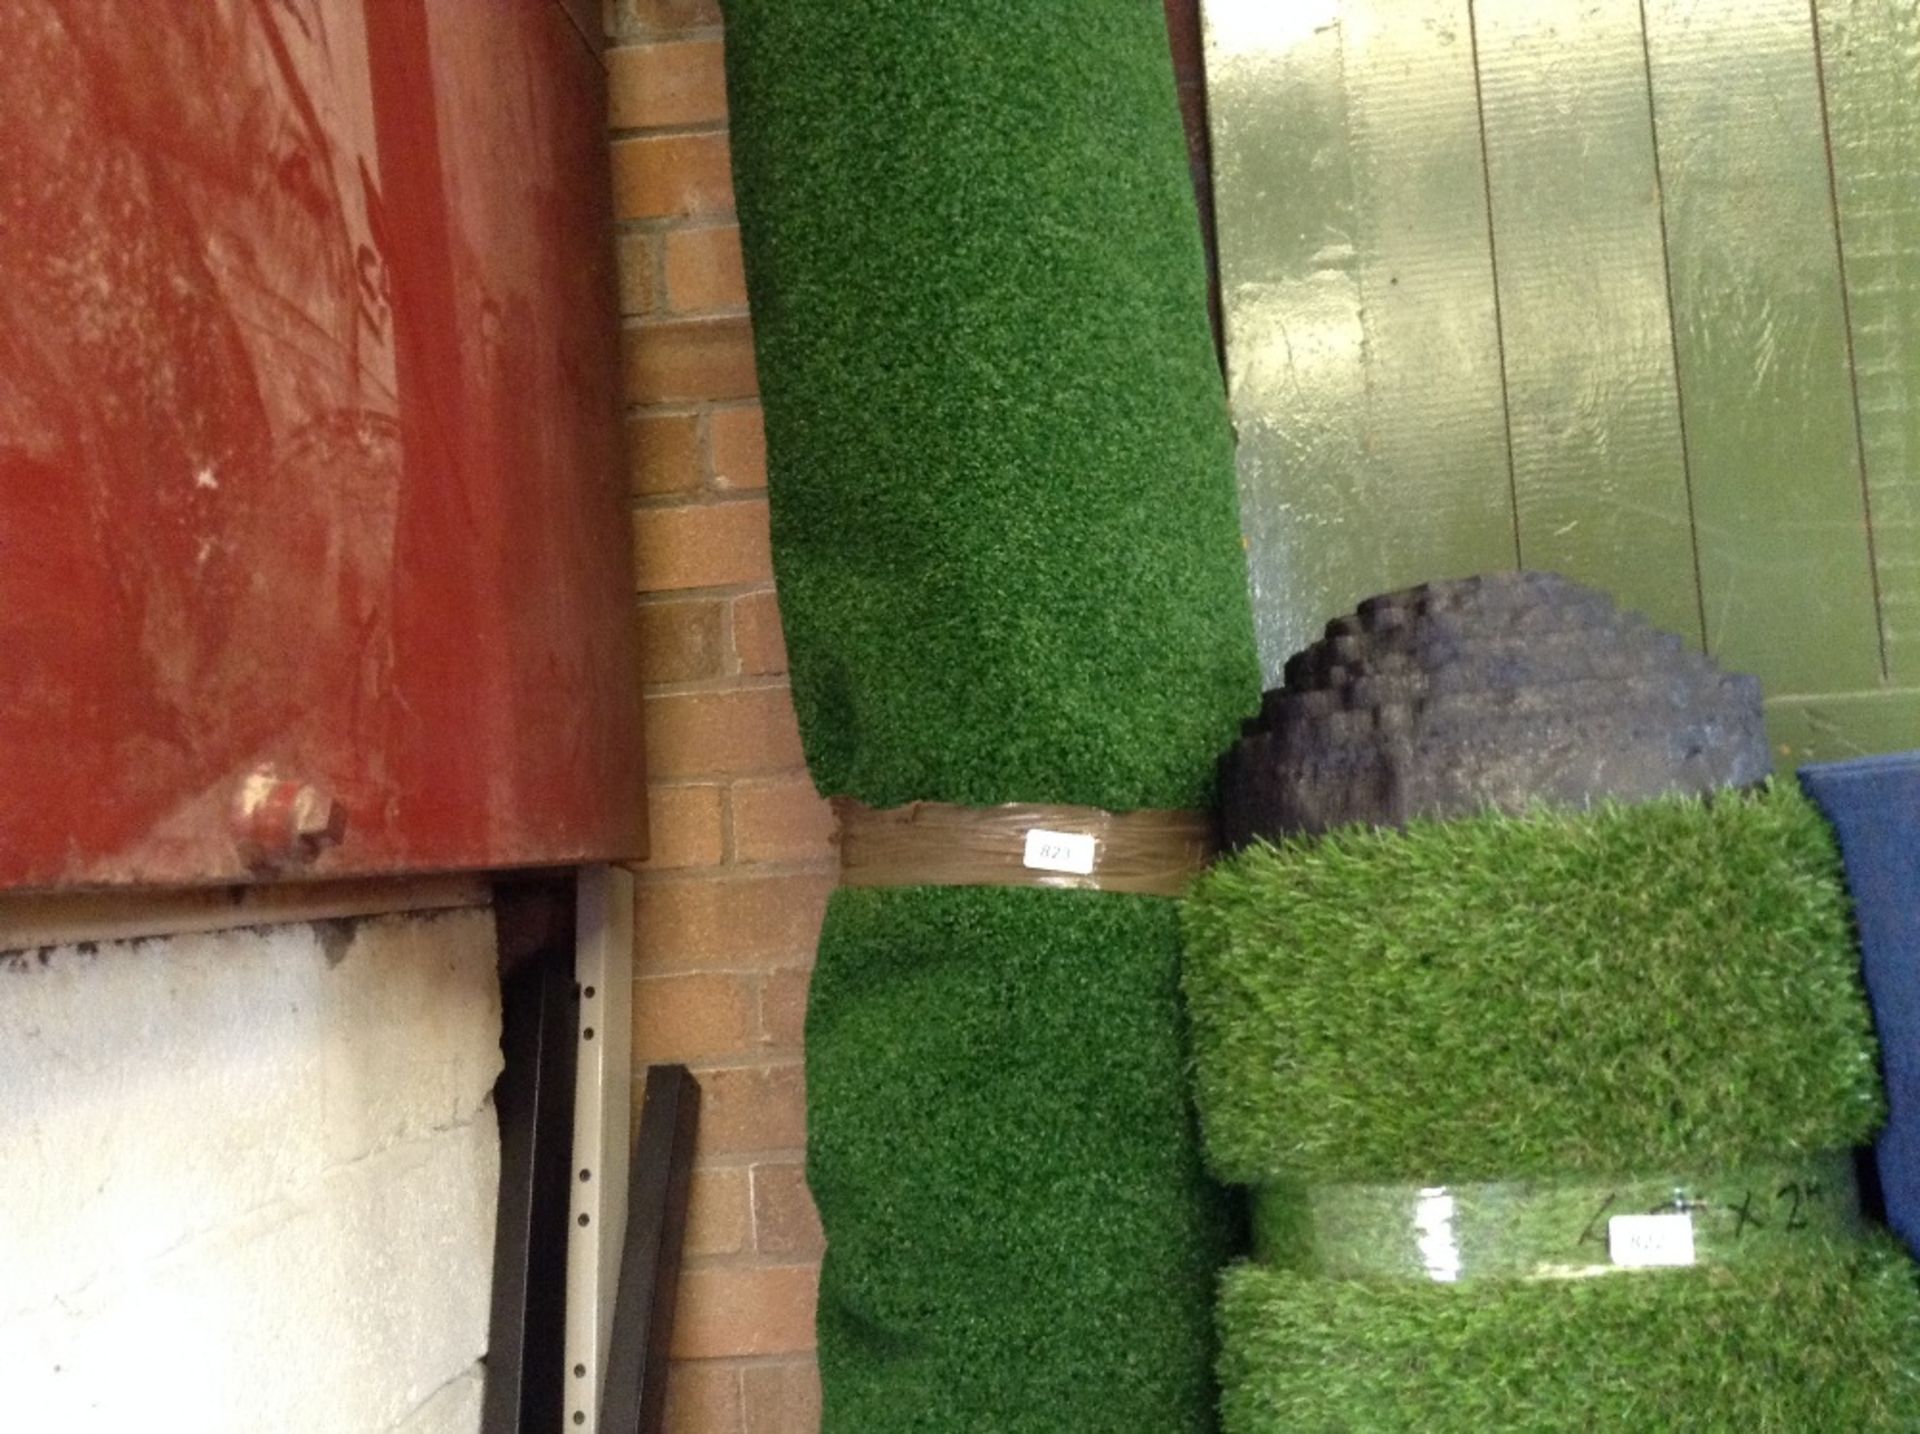 LARGE ROLL OF ASTRO TURF